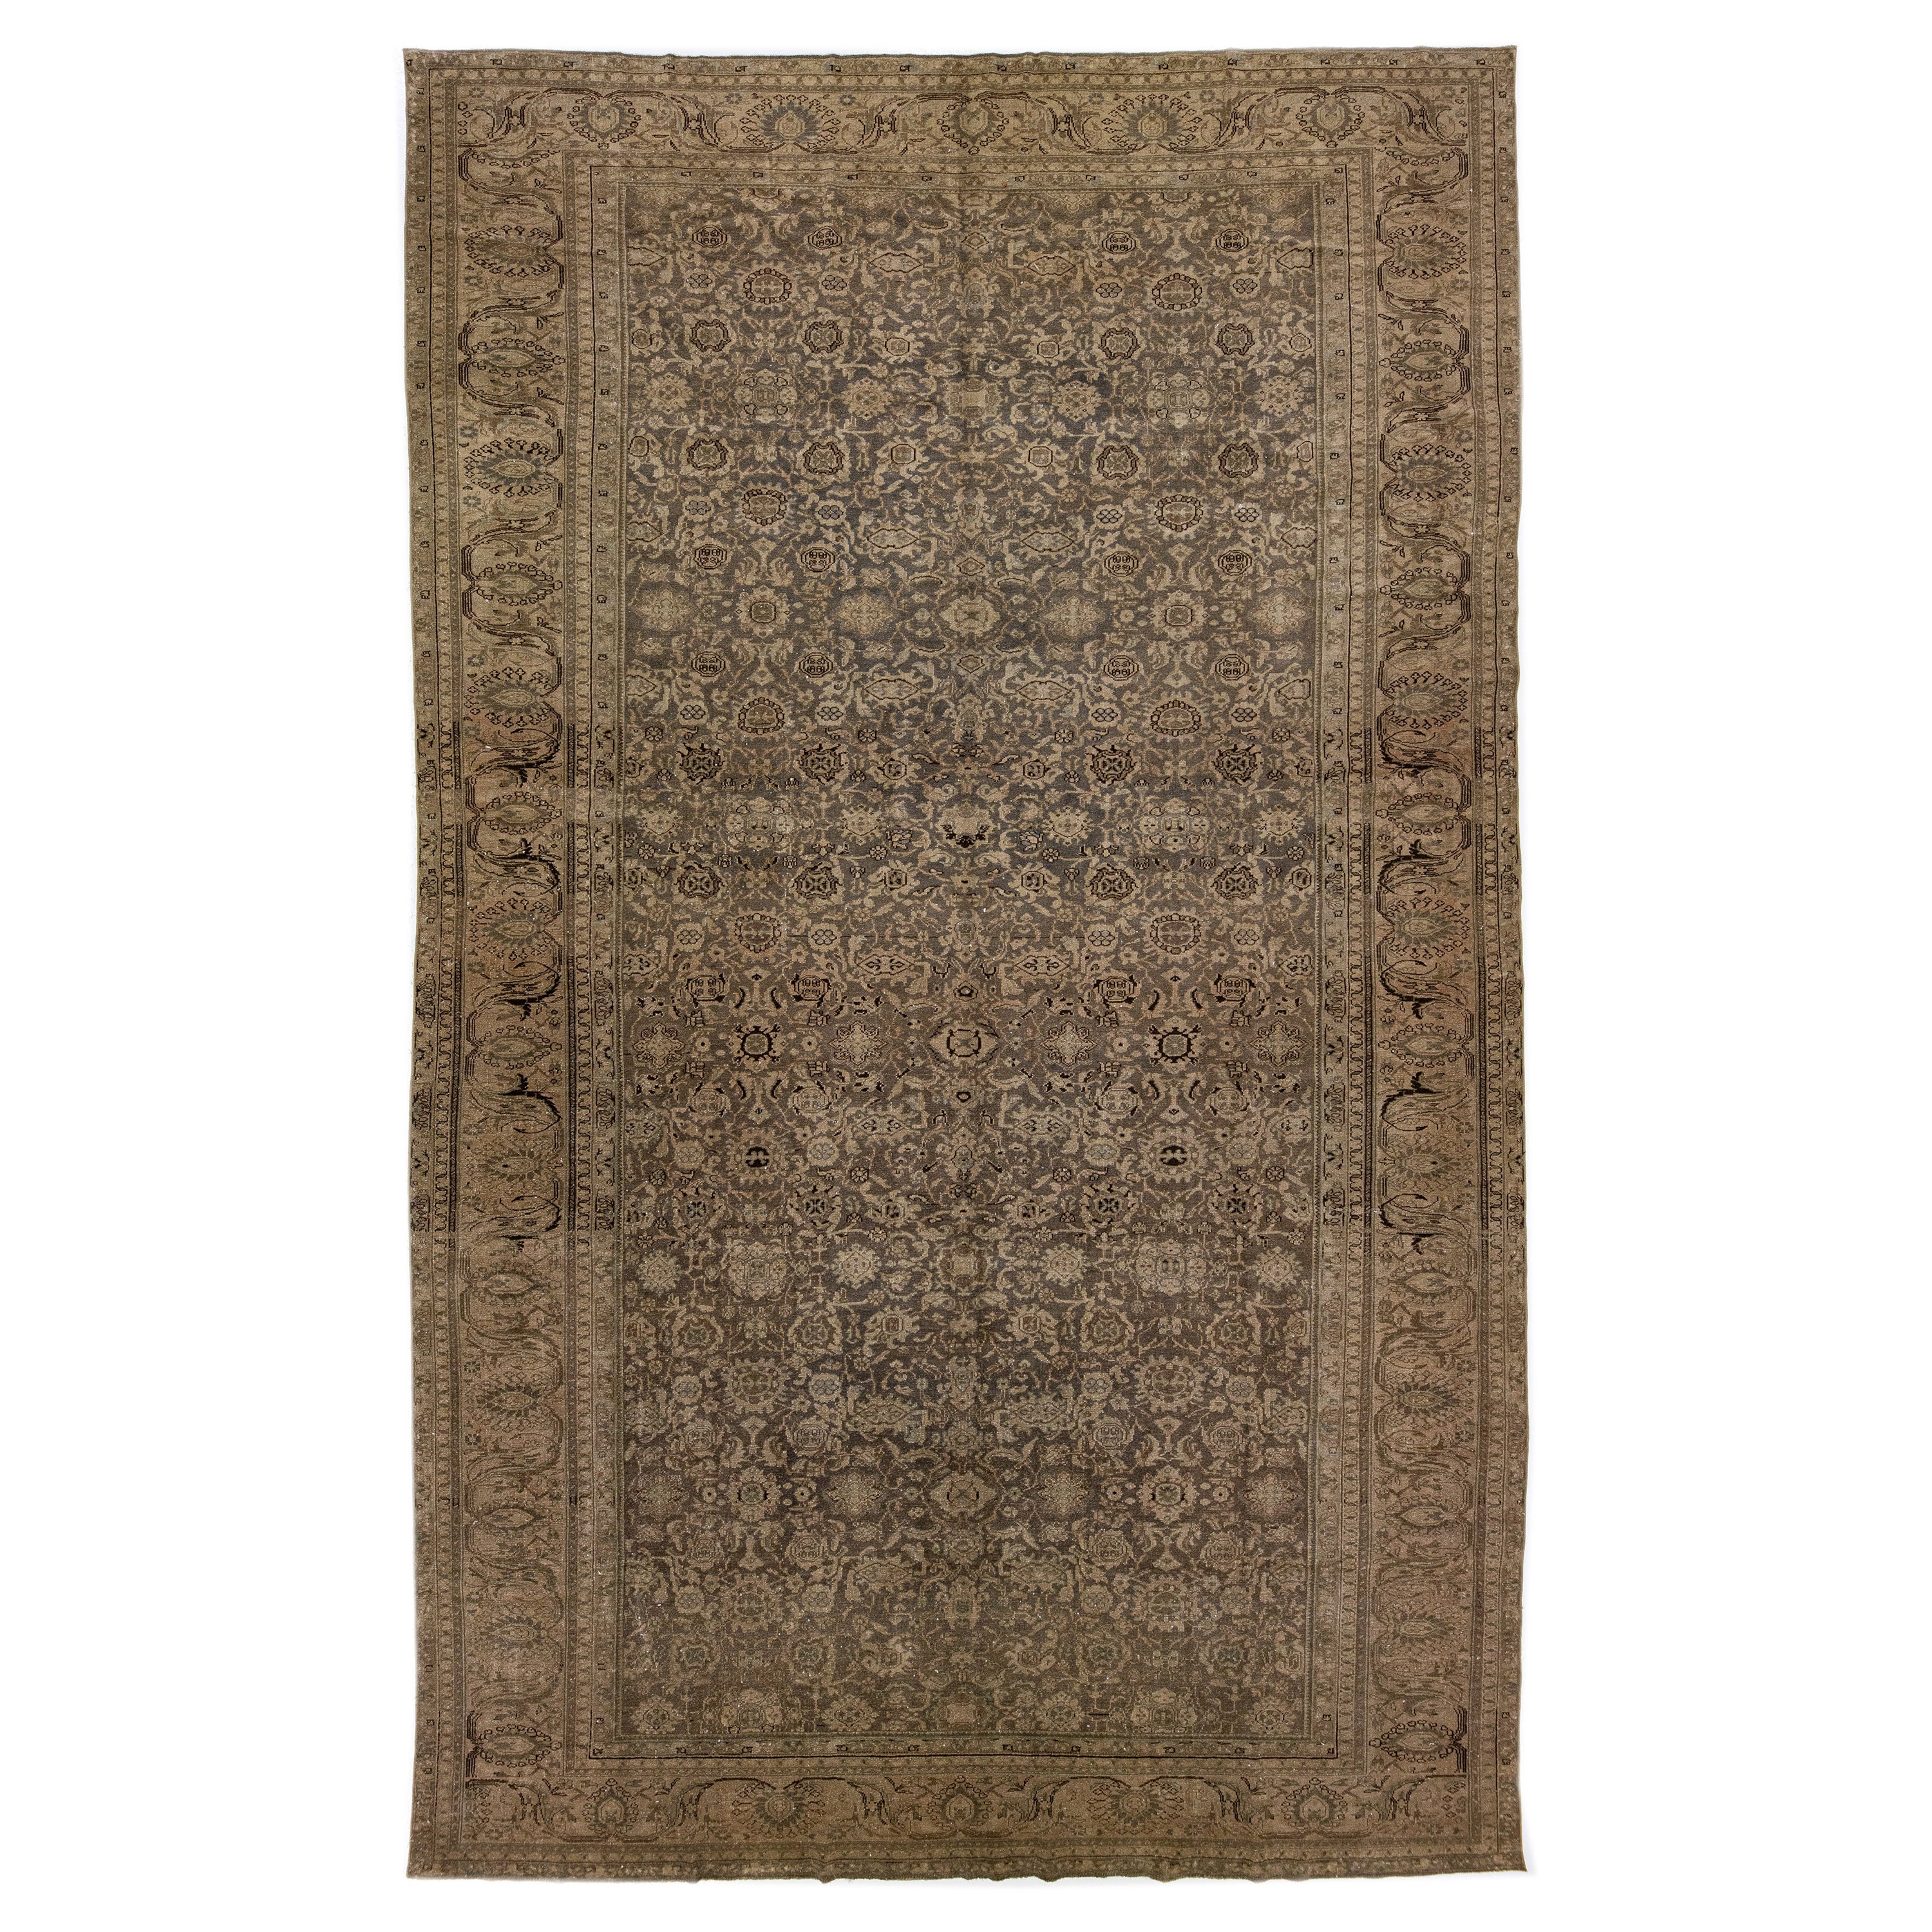 Handmade Tabriz 1900s Persian Wool Rug in Brown with Allover Motif